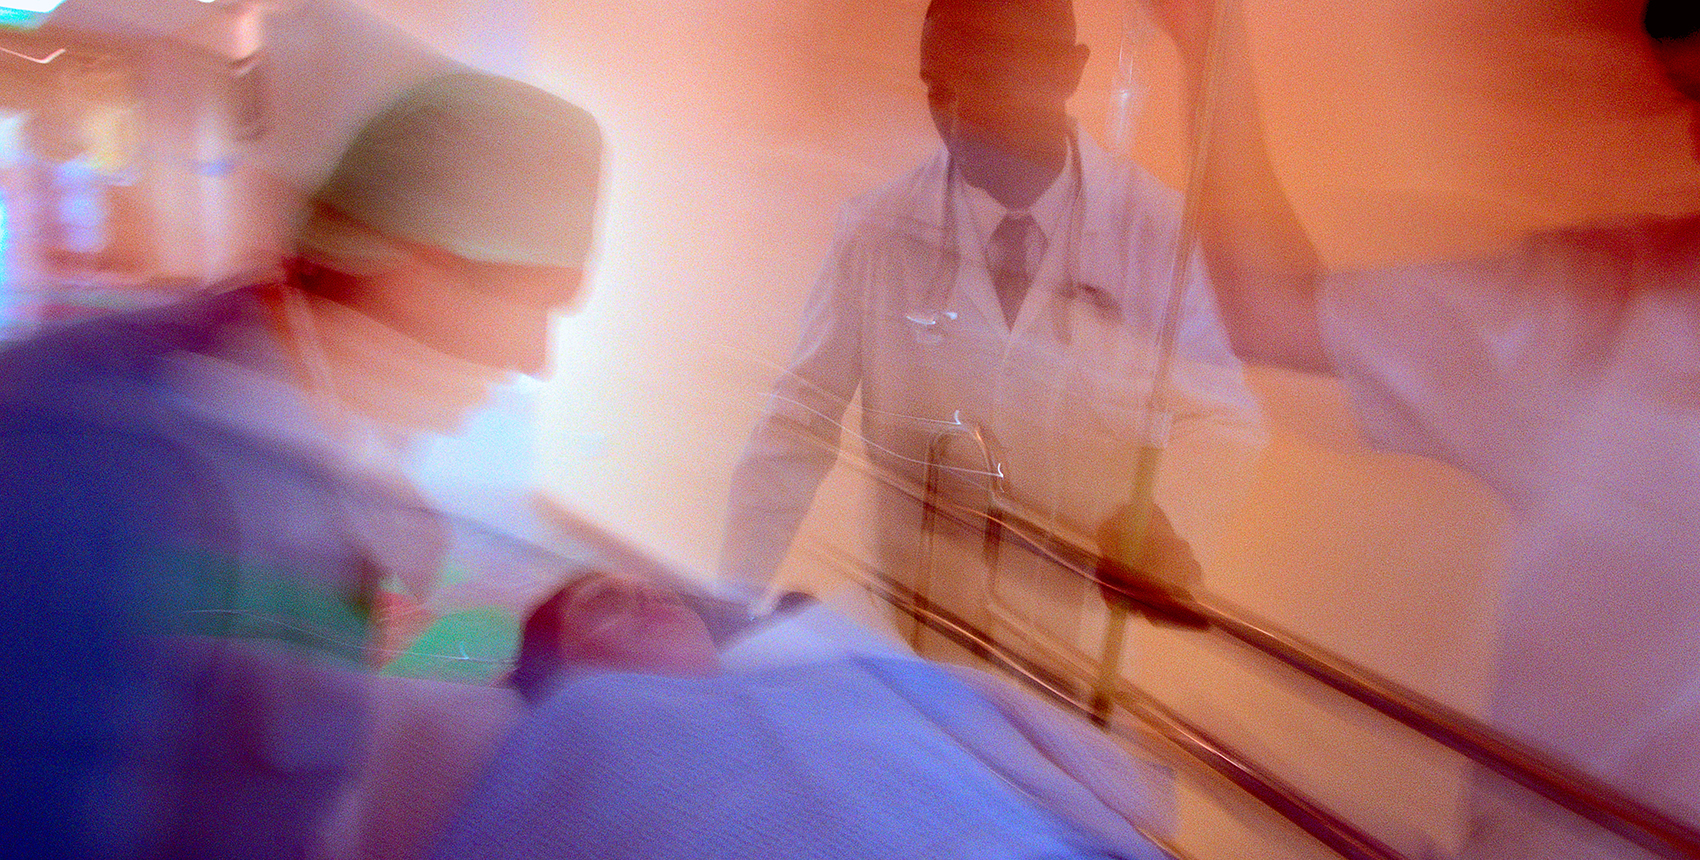 Motion blurred photo of hospital staff wheeling a patient on a gurney down a corridor